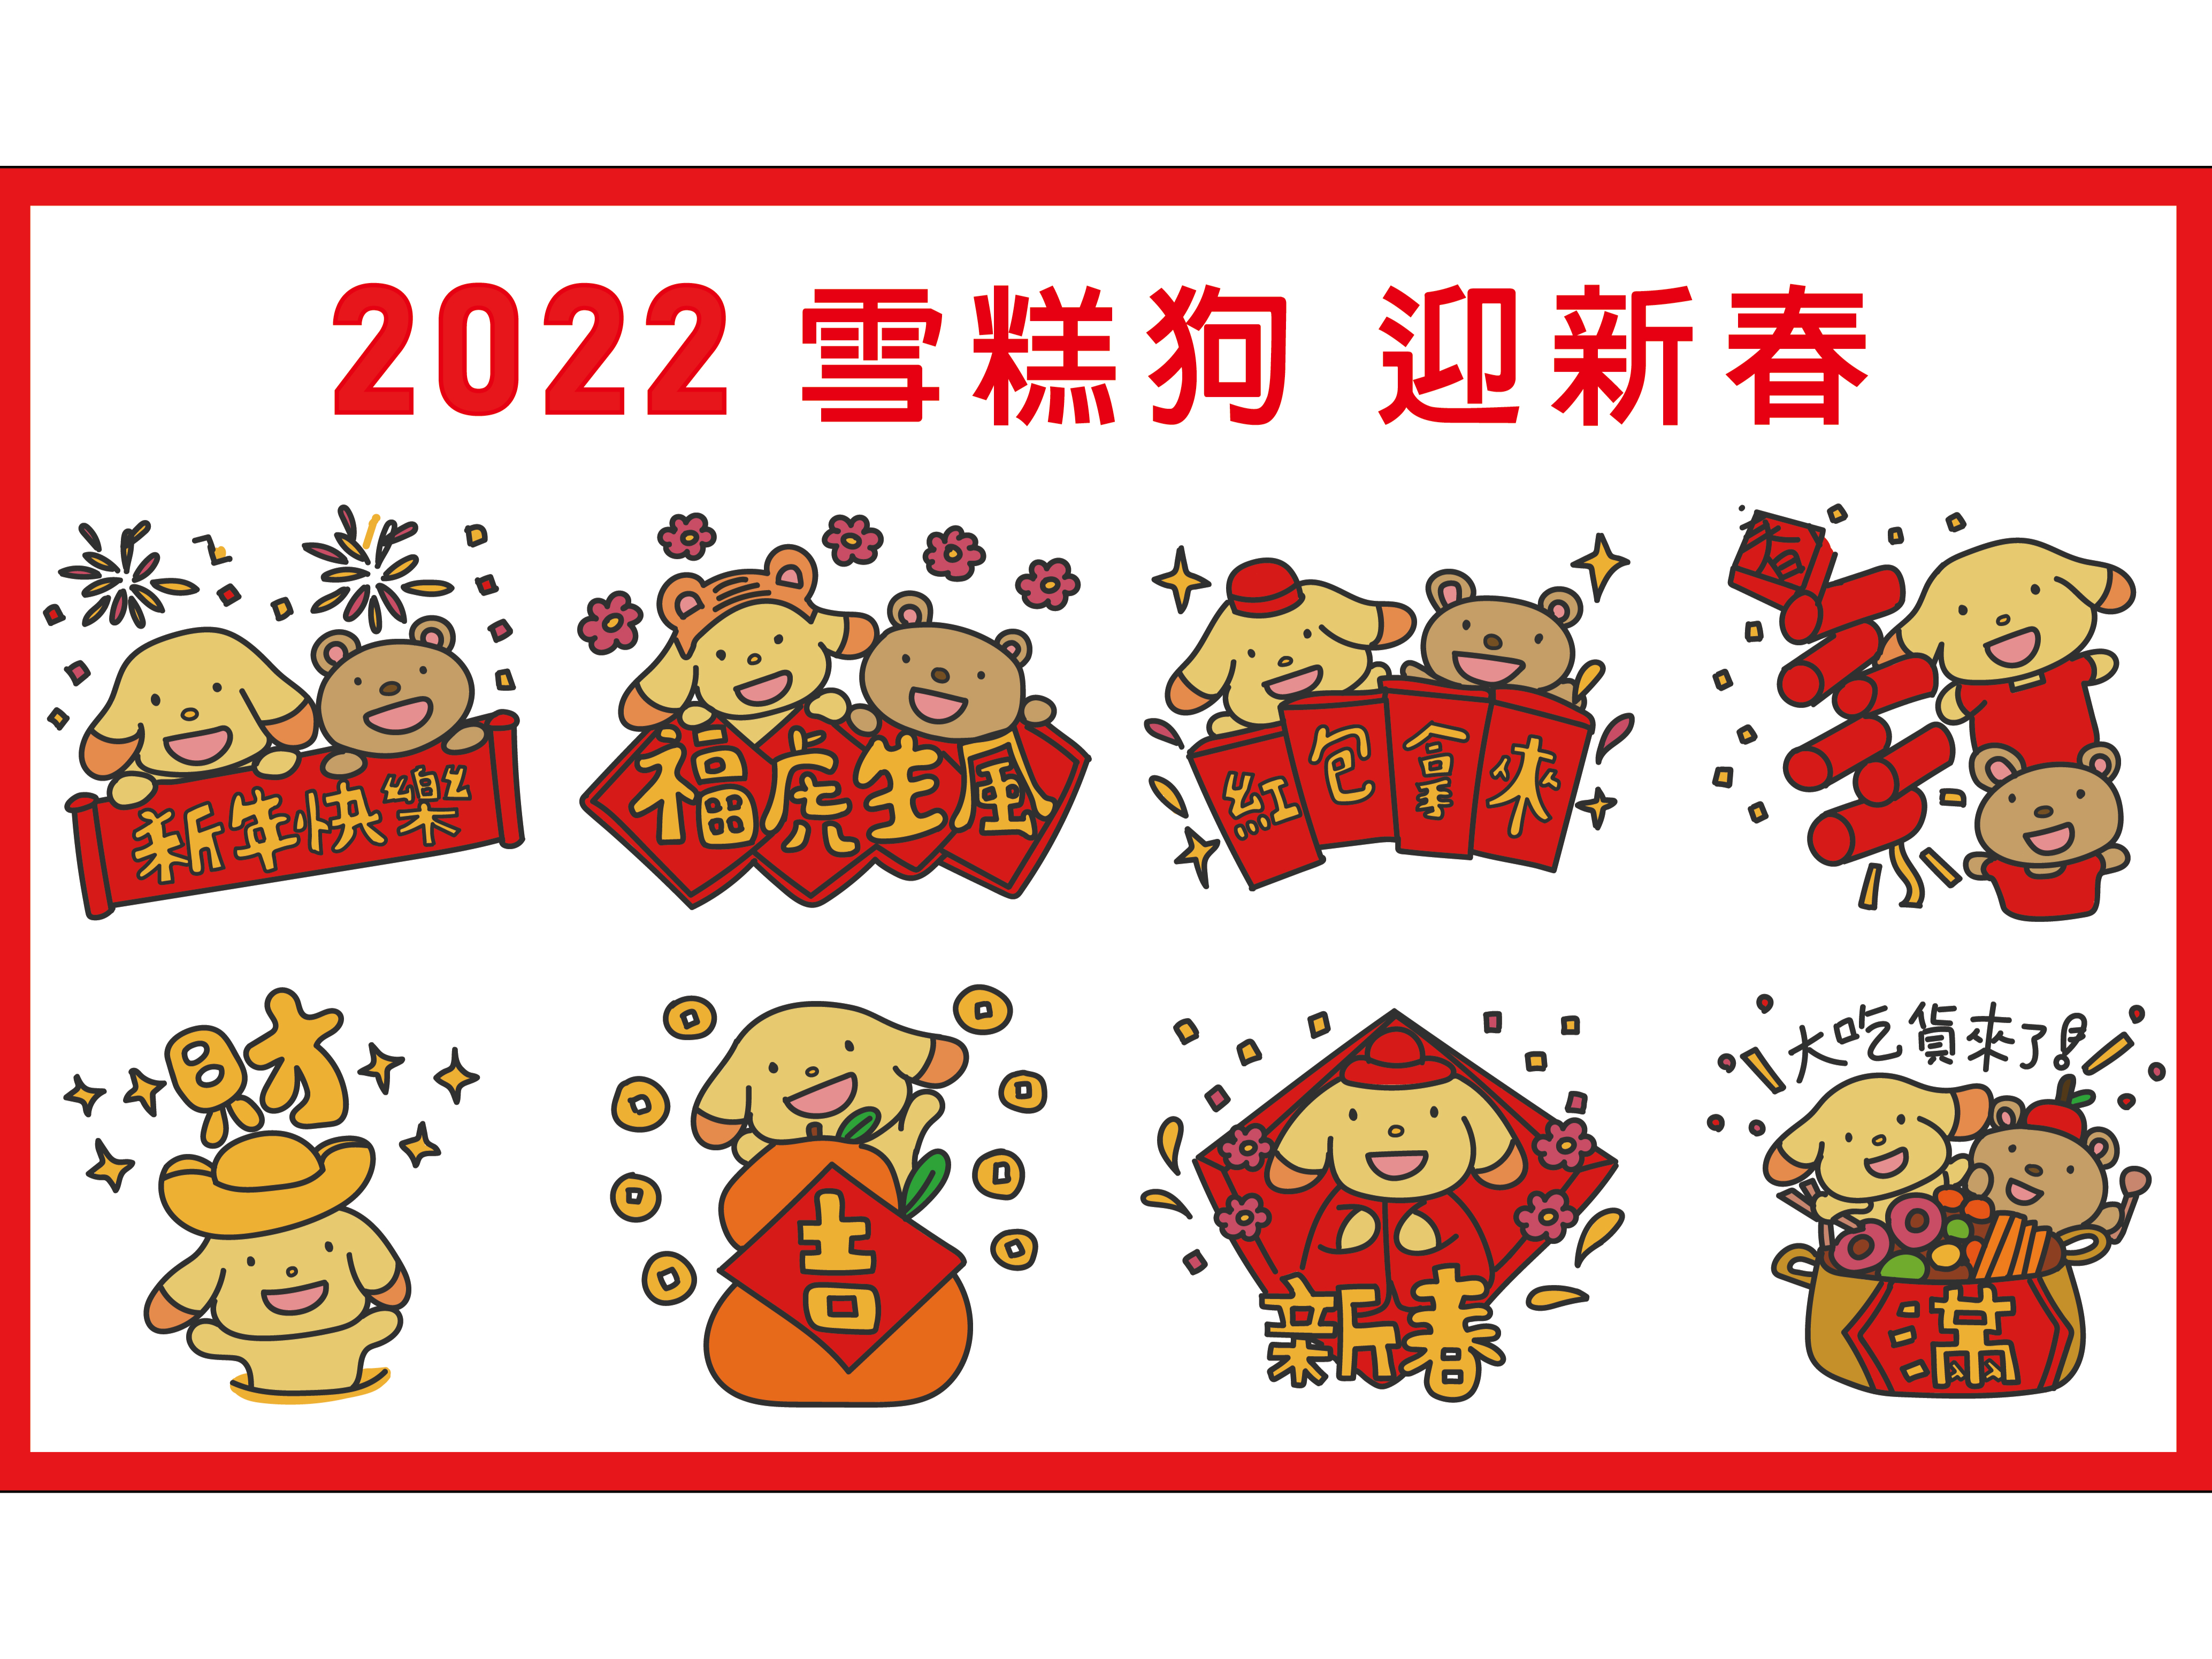 Cover of 2022  Line貼圖 雪糕狗-虎年新春.